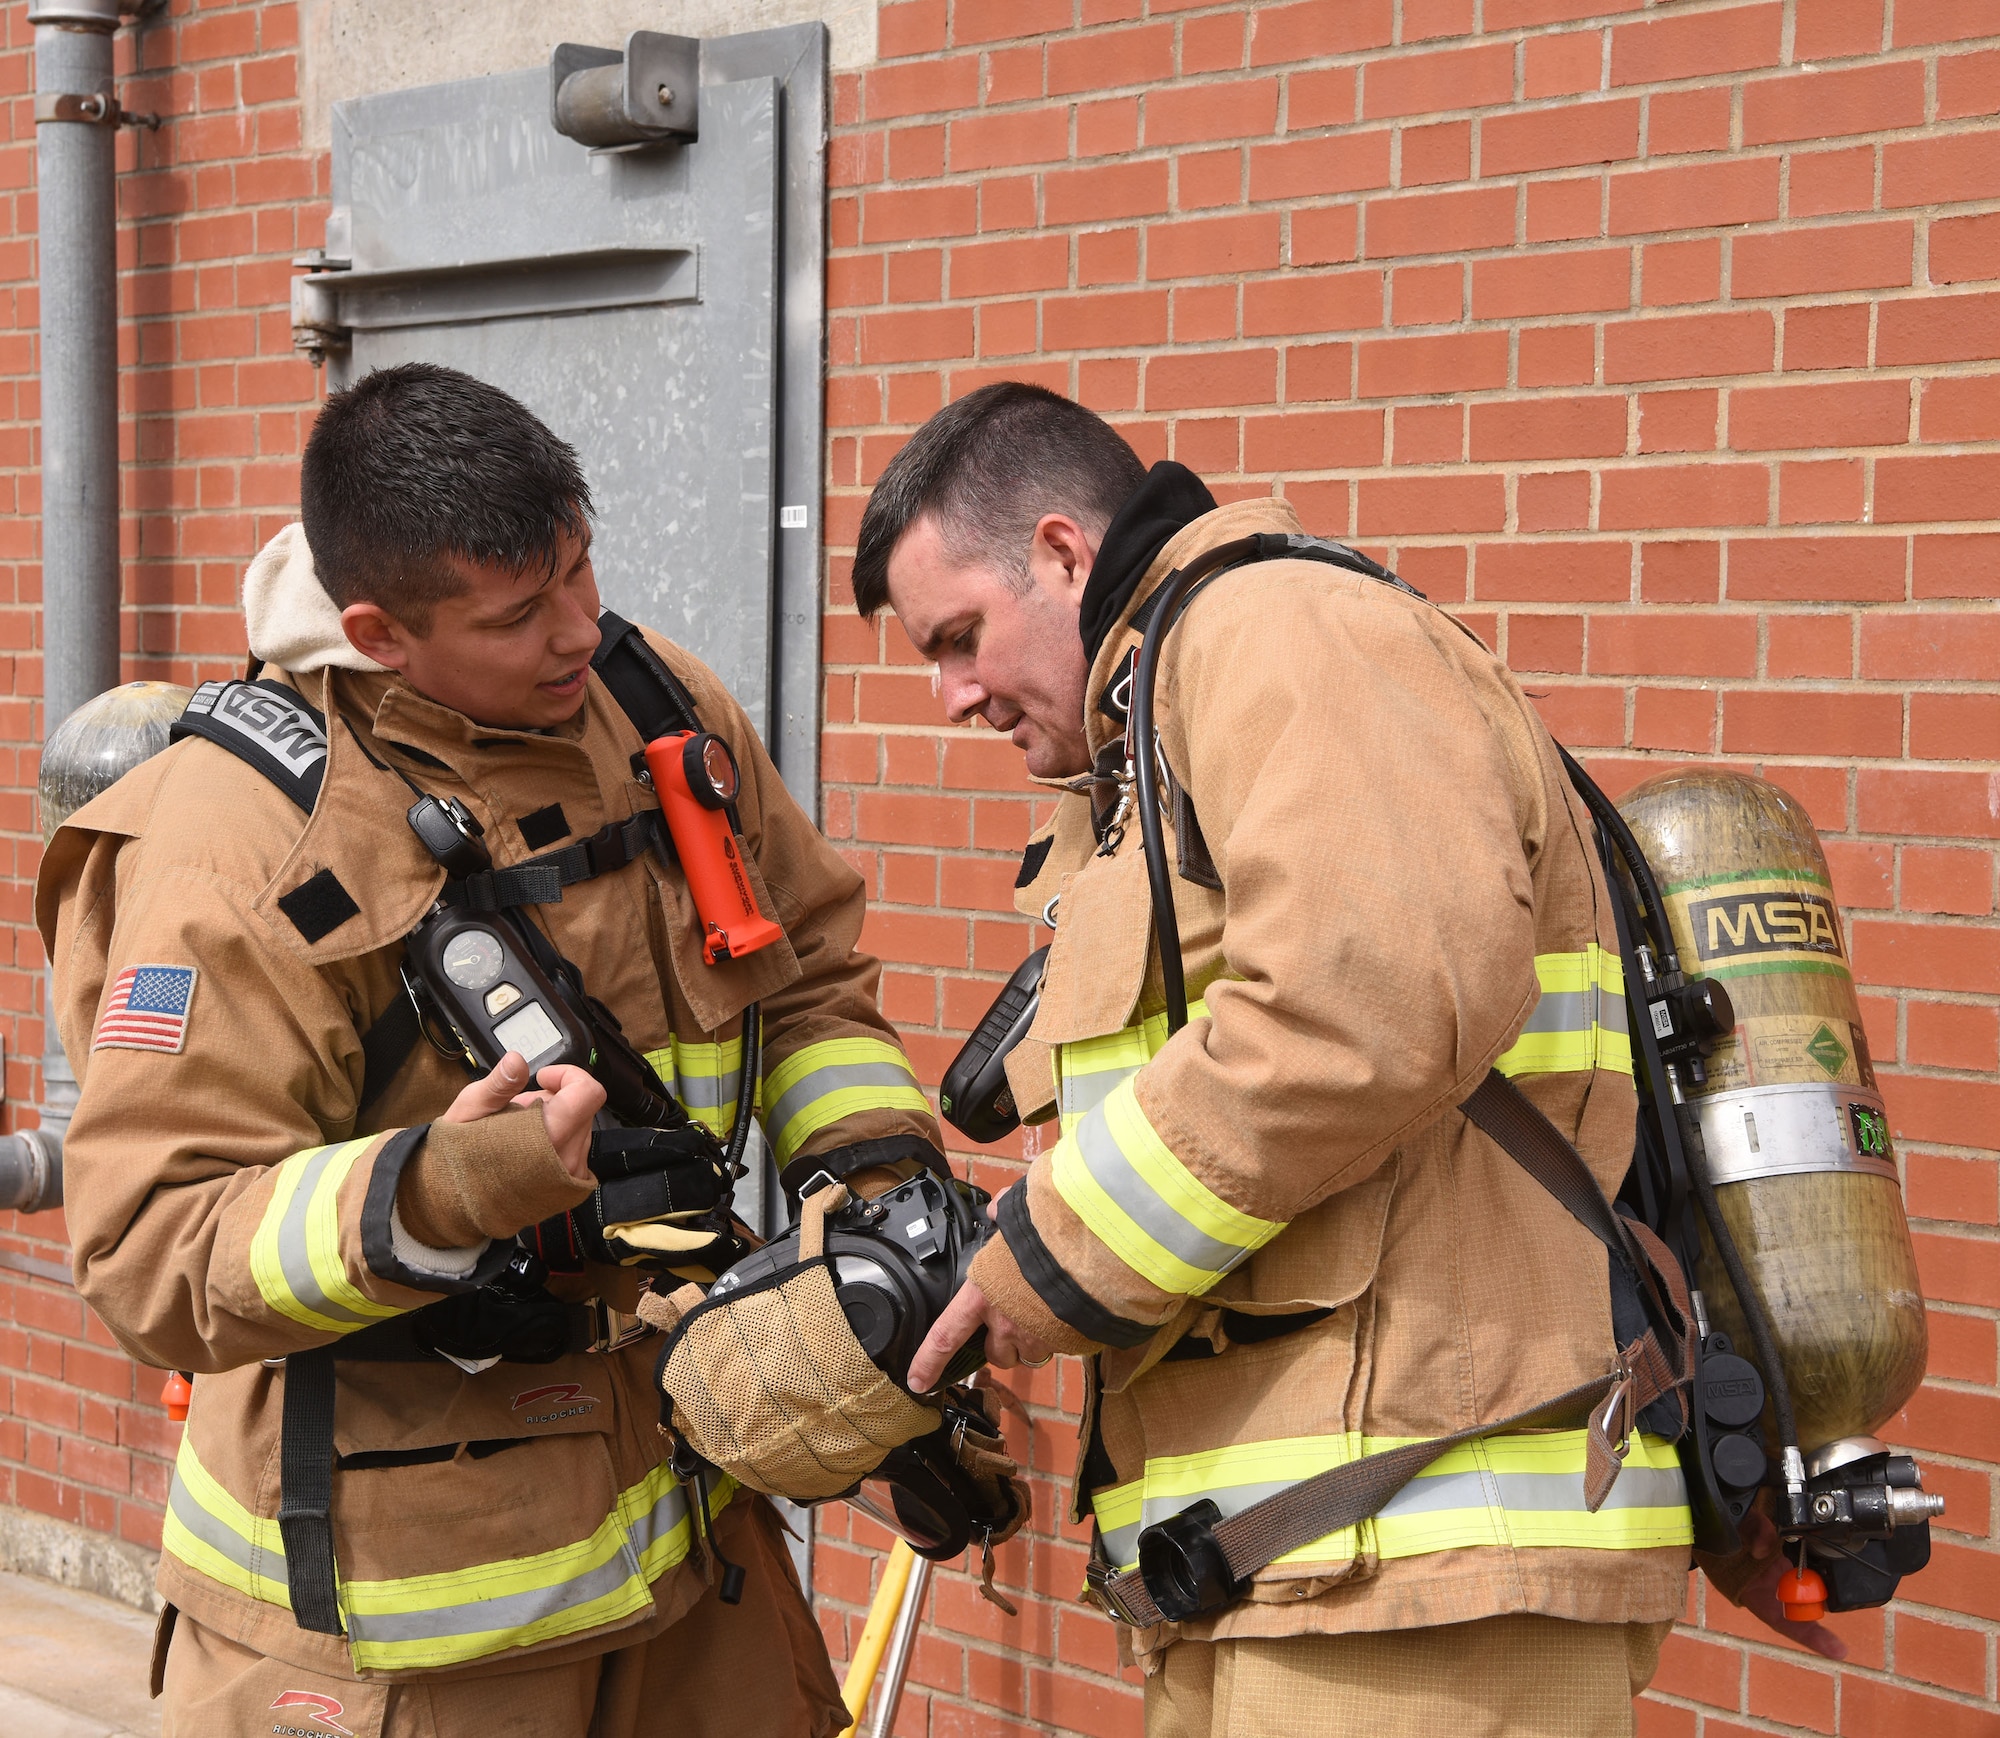 U.S. Air Force Col. Gene Jacobus, 100th Air Refueling Wing commander, right, listens as Staff Sgt. Eric Gonzalez, 100th Civil Engineer Squadron Fire Department lead firefighter, helps do a final check on his face mask as they prepare to enter the live-fire training facility at Royal Air Force Mildenhall, England, July 28, 2022.  The first-hand experience gave the commander a greater insight as to how much training and preparation the base firefighters undertake on a regular basis to ensure they are prepared for any emergency. (U.S. Air Force photo by Karen Abeyasekere)